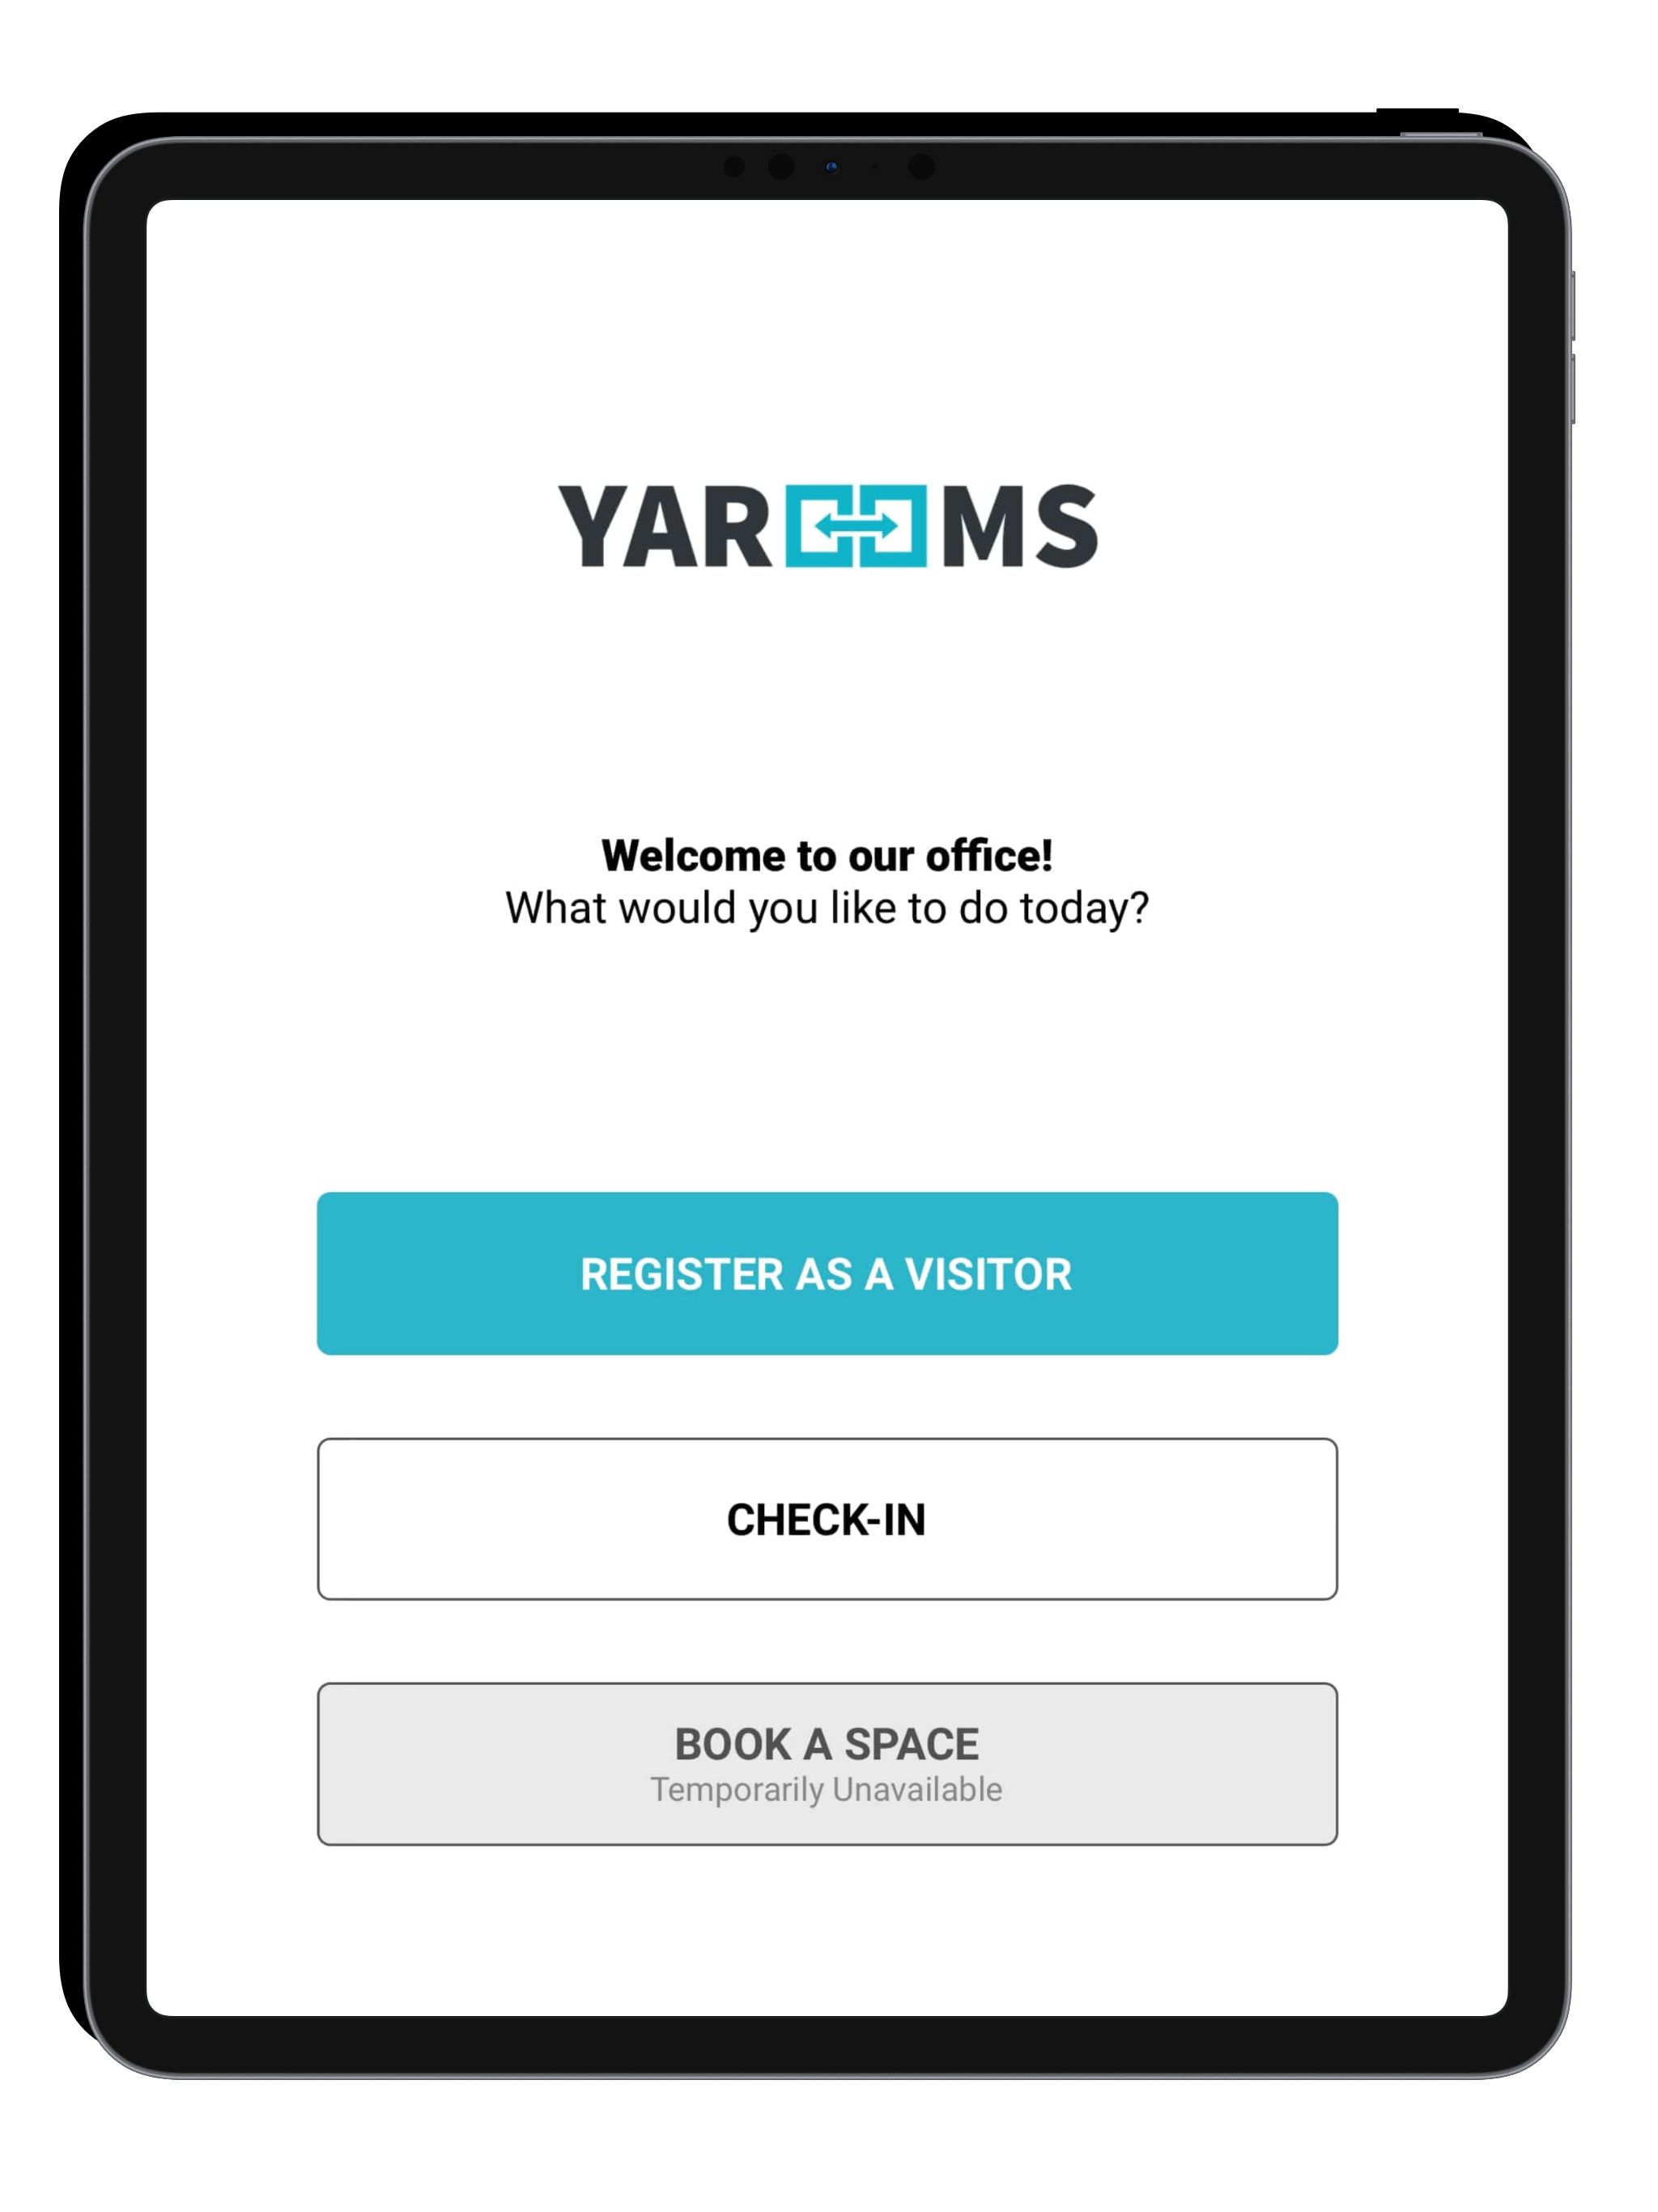 YAROOMS Software - A modern visitor management system made to save time, enable workplace compliance and position your lobby for a great first impression. Your branding-friendly, easily configurable interface.